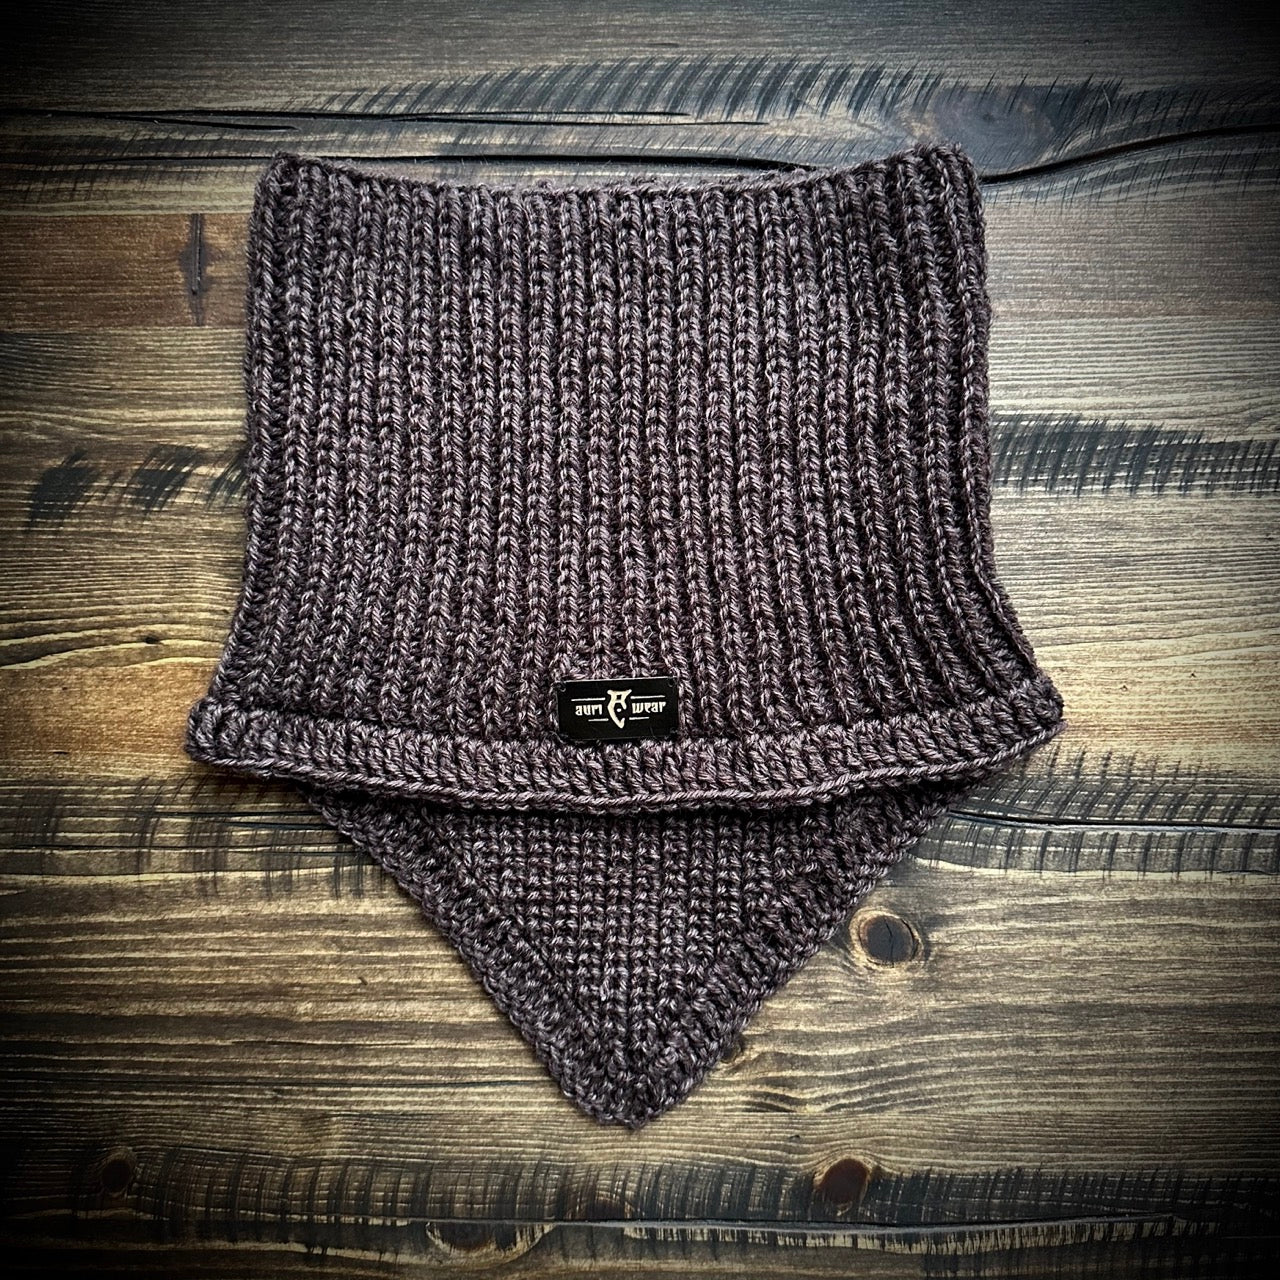 Handmade knitted earthy brown cowl